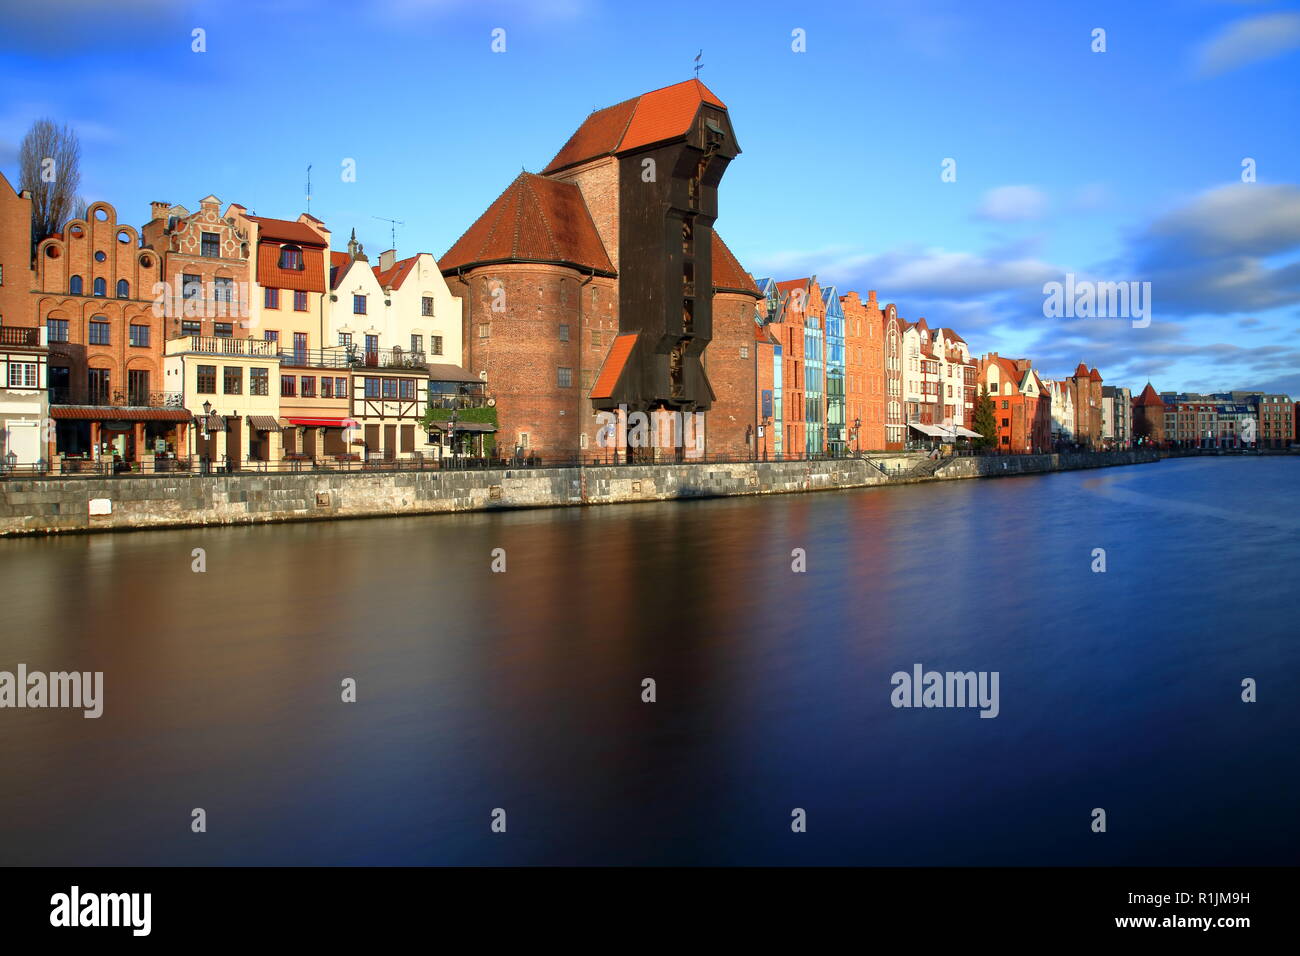 Panorama of Gdansk historical downtown, river, shore with beautiful architecture, medieval crane, skyline, blue sky with few clouds, long exposure. Stock Photo